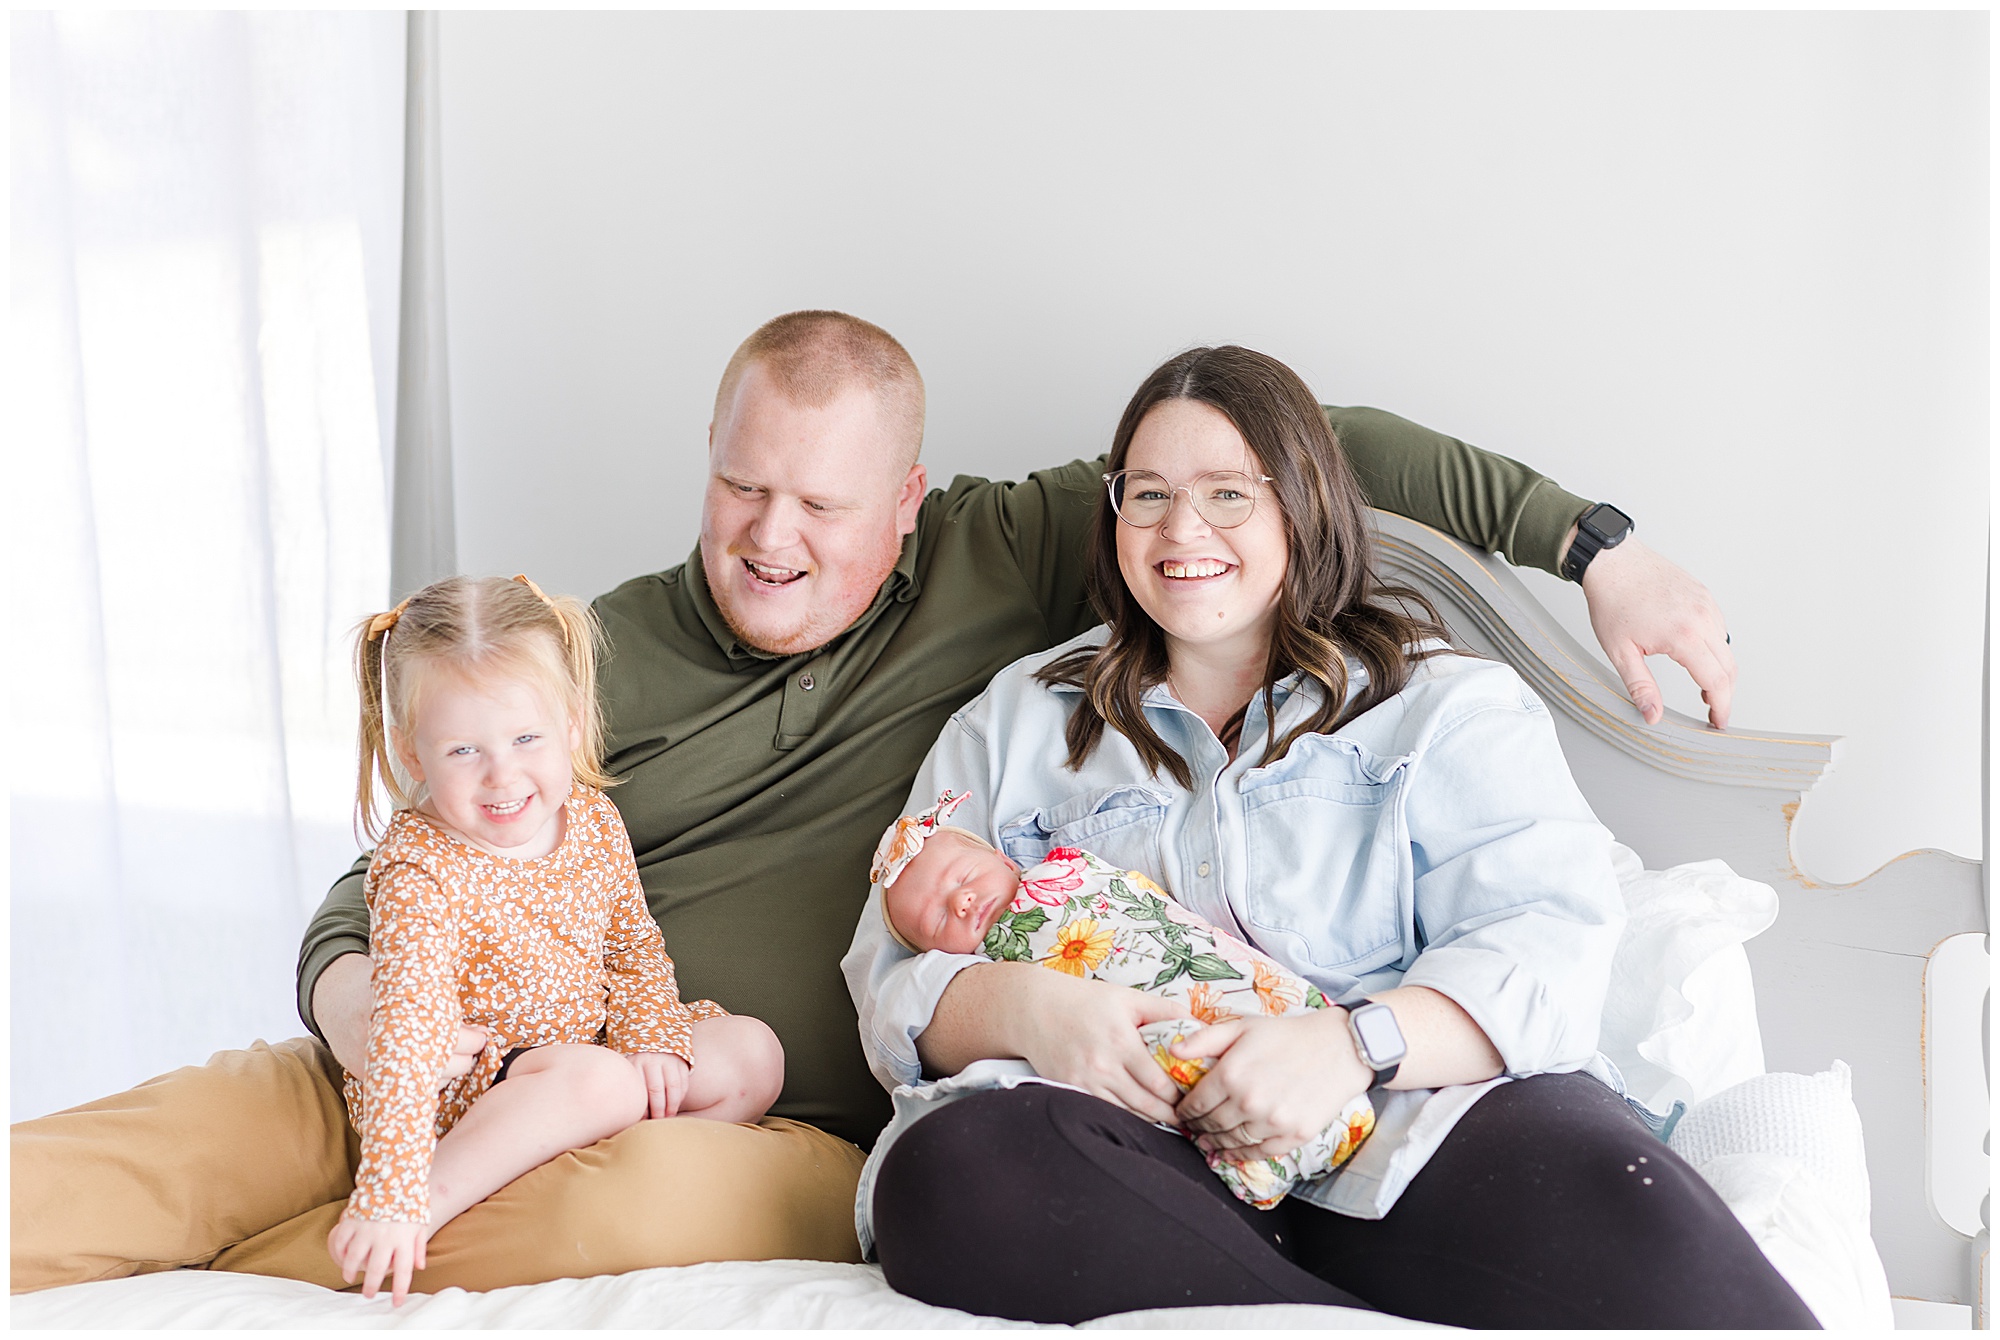 Mom and dad sit on bed with white sheets while holding newborn baby in colorful floral swaddle and toddler in orange dress during family photo session. 